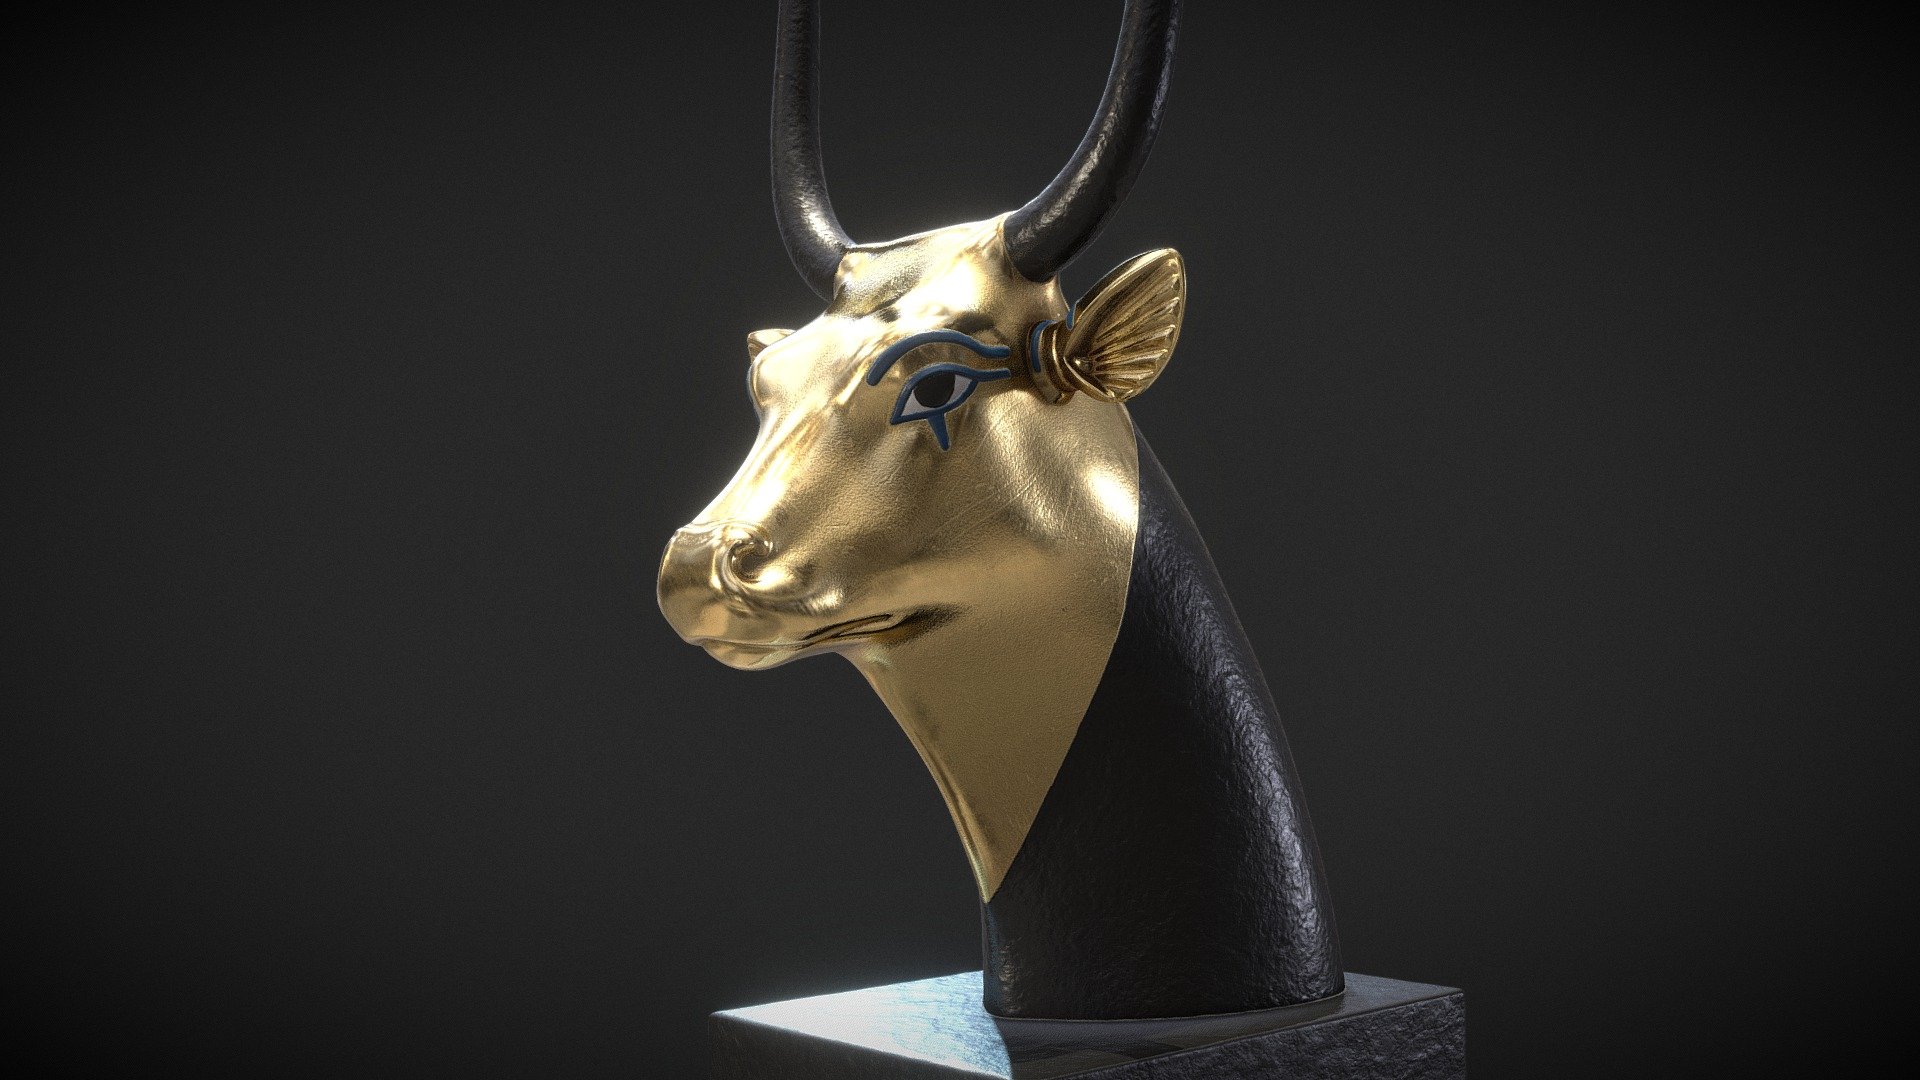 ** GILDED HEAD OF HATHOR - Egyptian Art from grave of Tutankhamun. This golden cow head represent the Goddess of the West, Hathor. The use of gold for the skin of the face represents the immortality of the Gods and Goddesses.

lowpoly
Let me know if you have any requests.

Enjoy! - Hathor Cow Head - Lowpoly - Buy Royalty Free 3D model by Omassyx 3d model